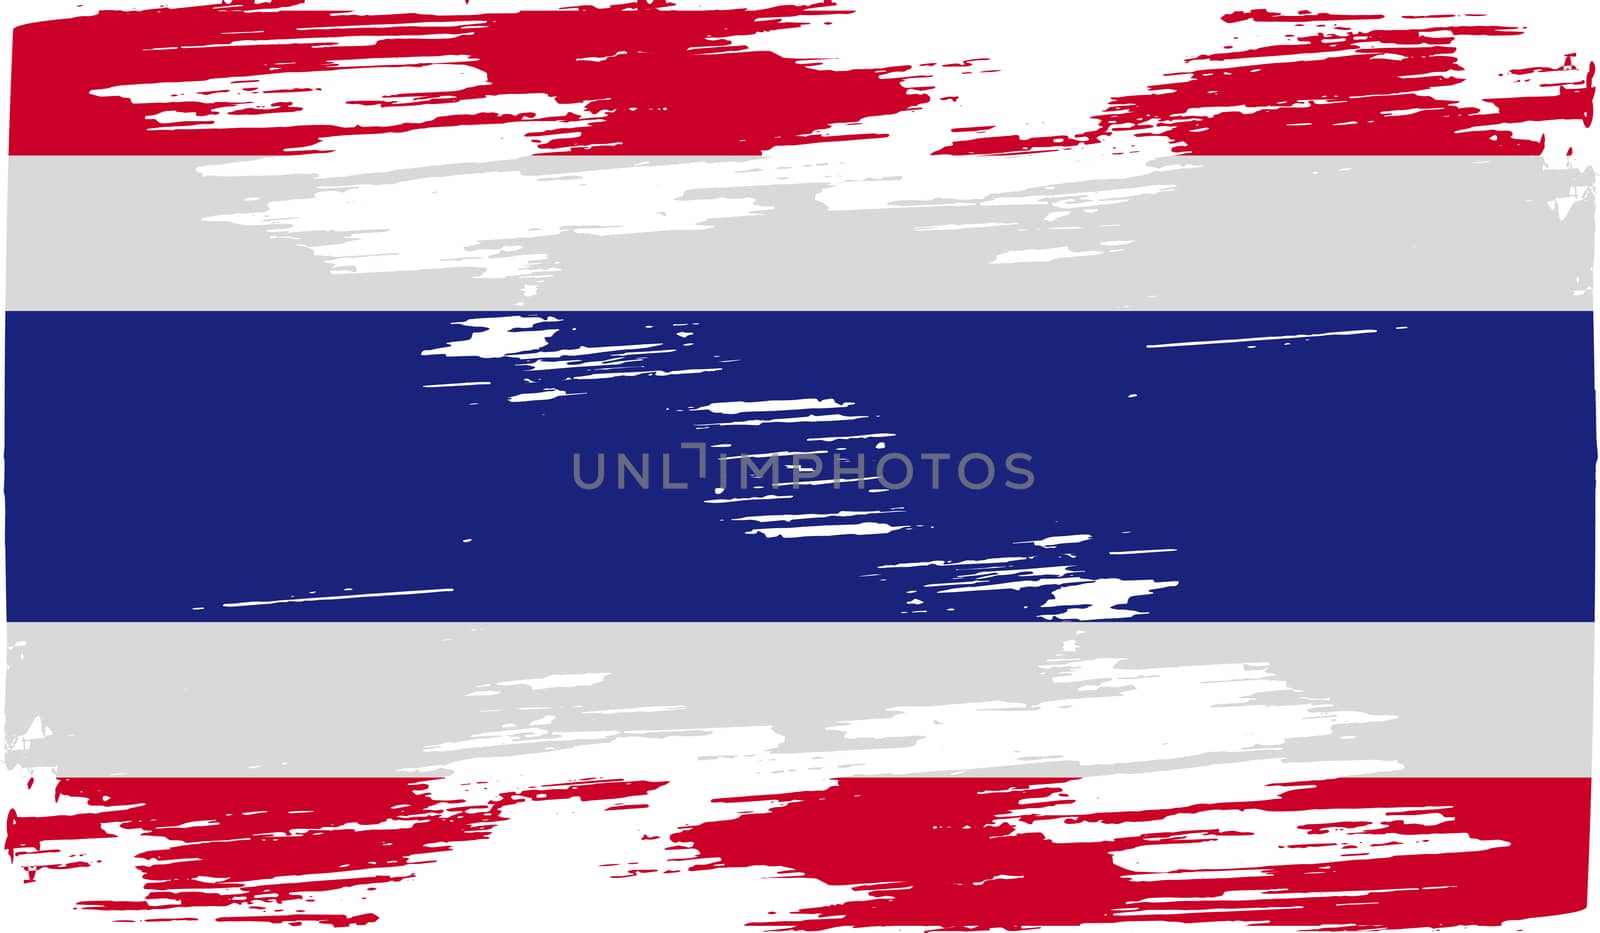 Flag of Thailand with old texture.  illustration